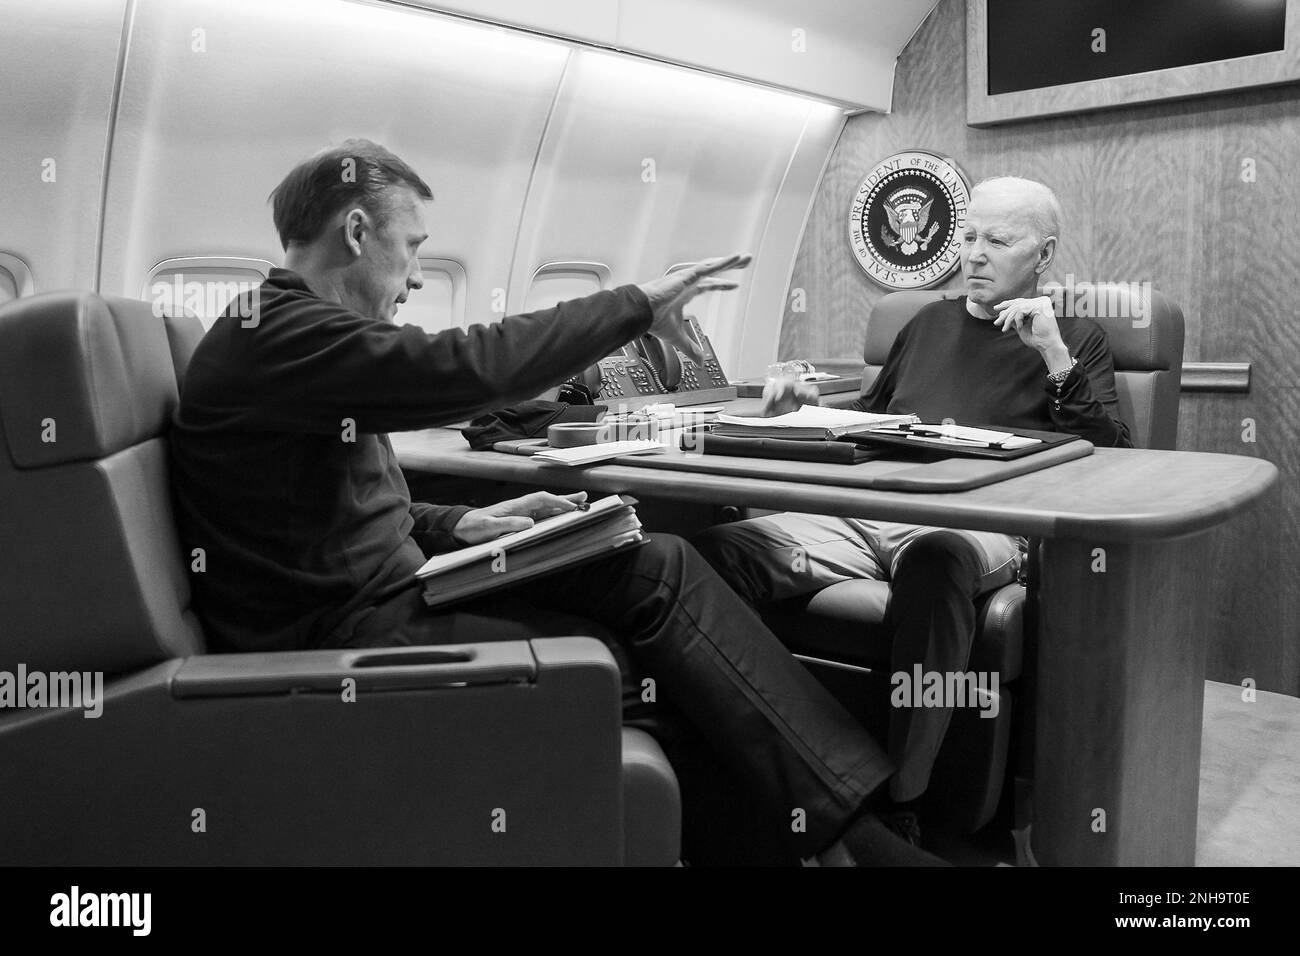 Air Force One, International Airspace. 19th Feb, 2023. Air Force One, International Airspace. 19 February, 2023. U.S. President Joe Biden, right, listens to National Security Advisor Jake Sullivan during a briefing aboard Air Force One on route to Germany, February 19, 2023 in Kyiv, Ukraine. Biden departed Washington at 4:15am to Germany and then on to Poland before board a train to Kiev on an unannounced visit to renew American support for Ukraine. Credit: Adam Schultz/White House Photo/Alamy Live News Stock Photo